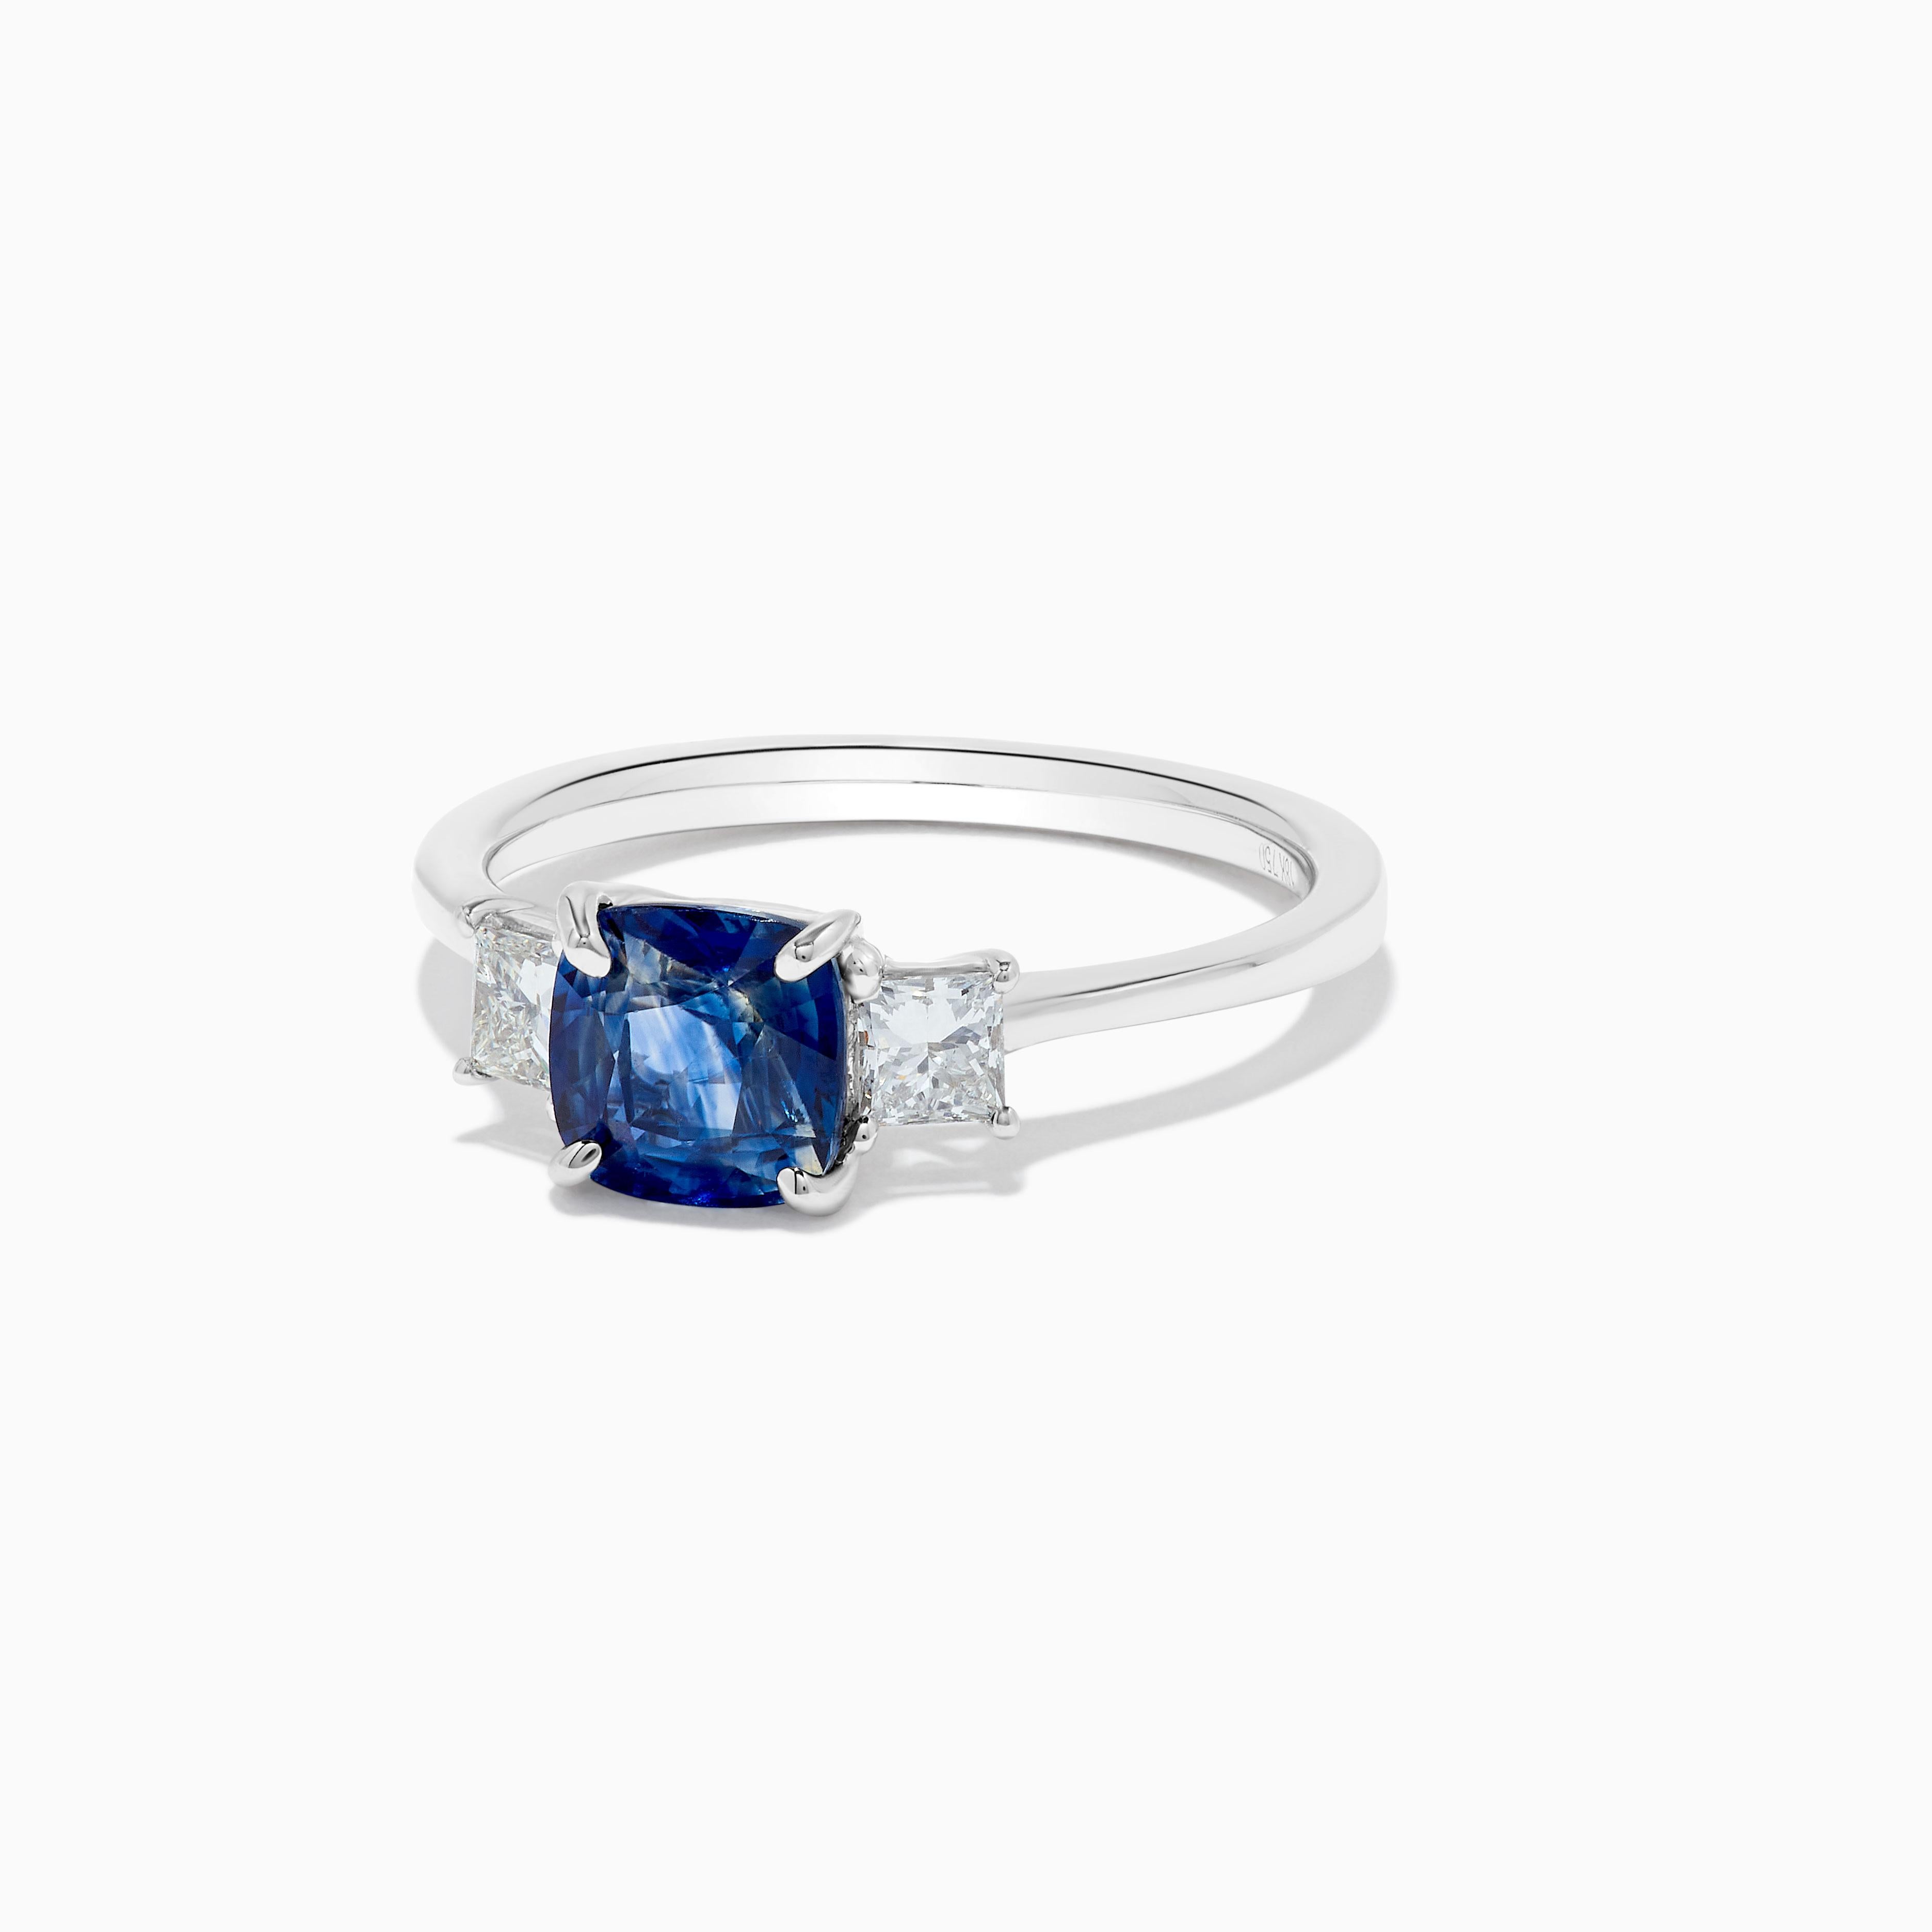 RareGemWorld's classic sapphire ring. Mounted in a beautiful 18K White Gold setting with a natural cushion cut blue sapphire. The sapphire is surrounded by two natural princes cut white diamonds. This ring is guaranteed to impress and enhance your